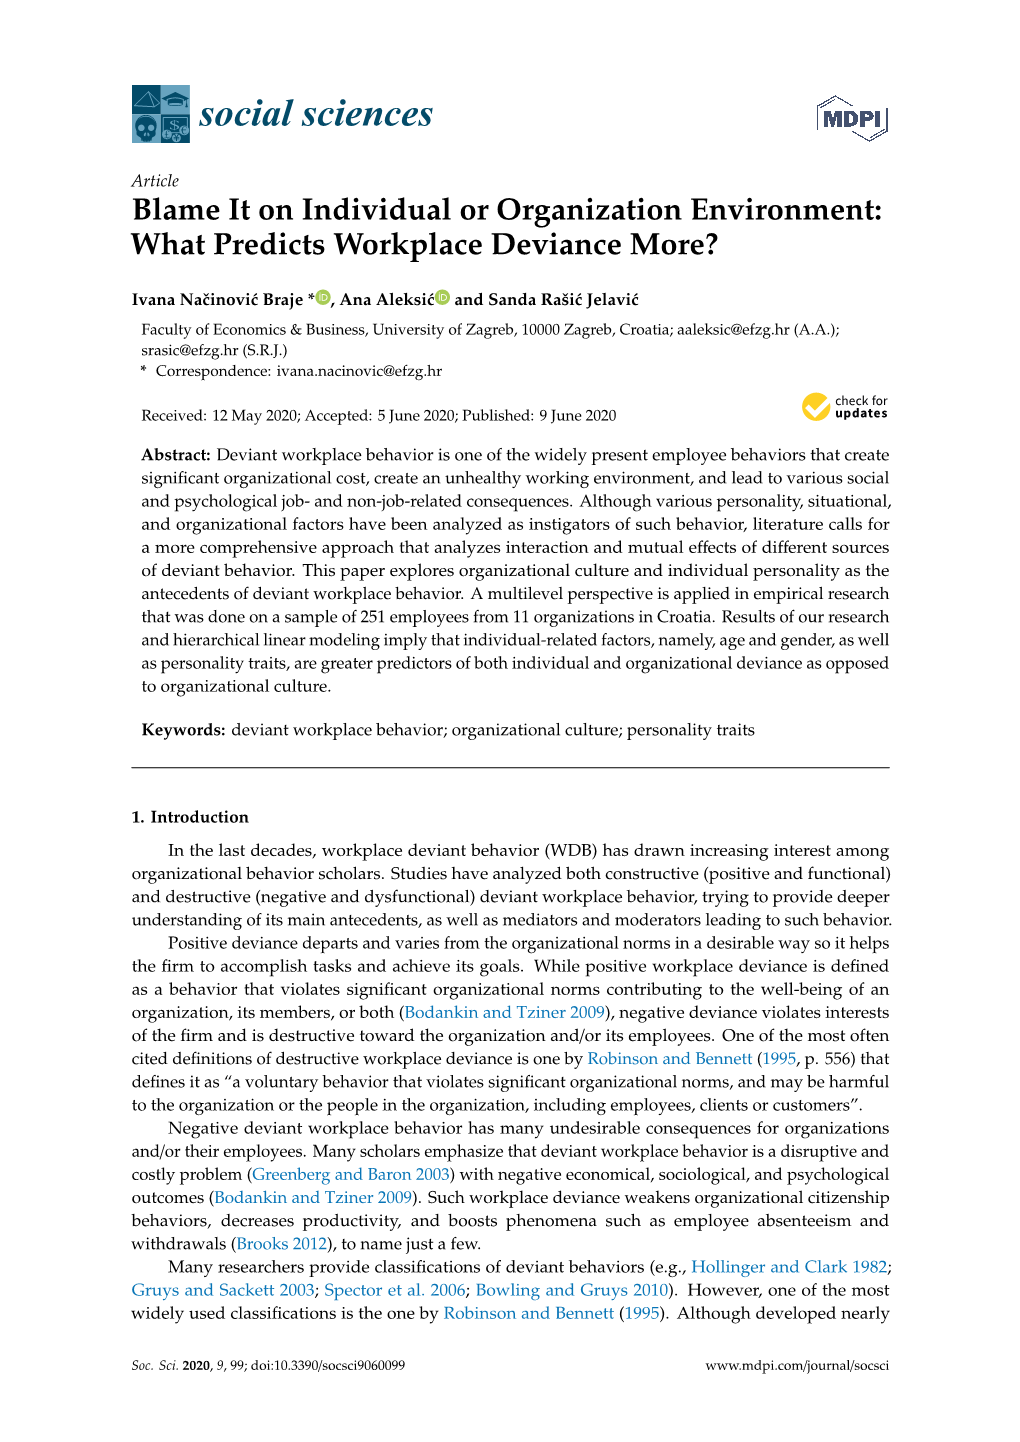 What Predicts Workplace Deviance More?